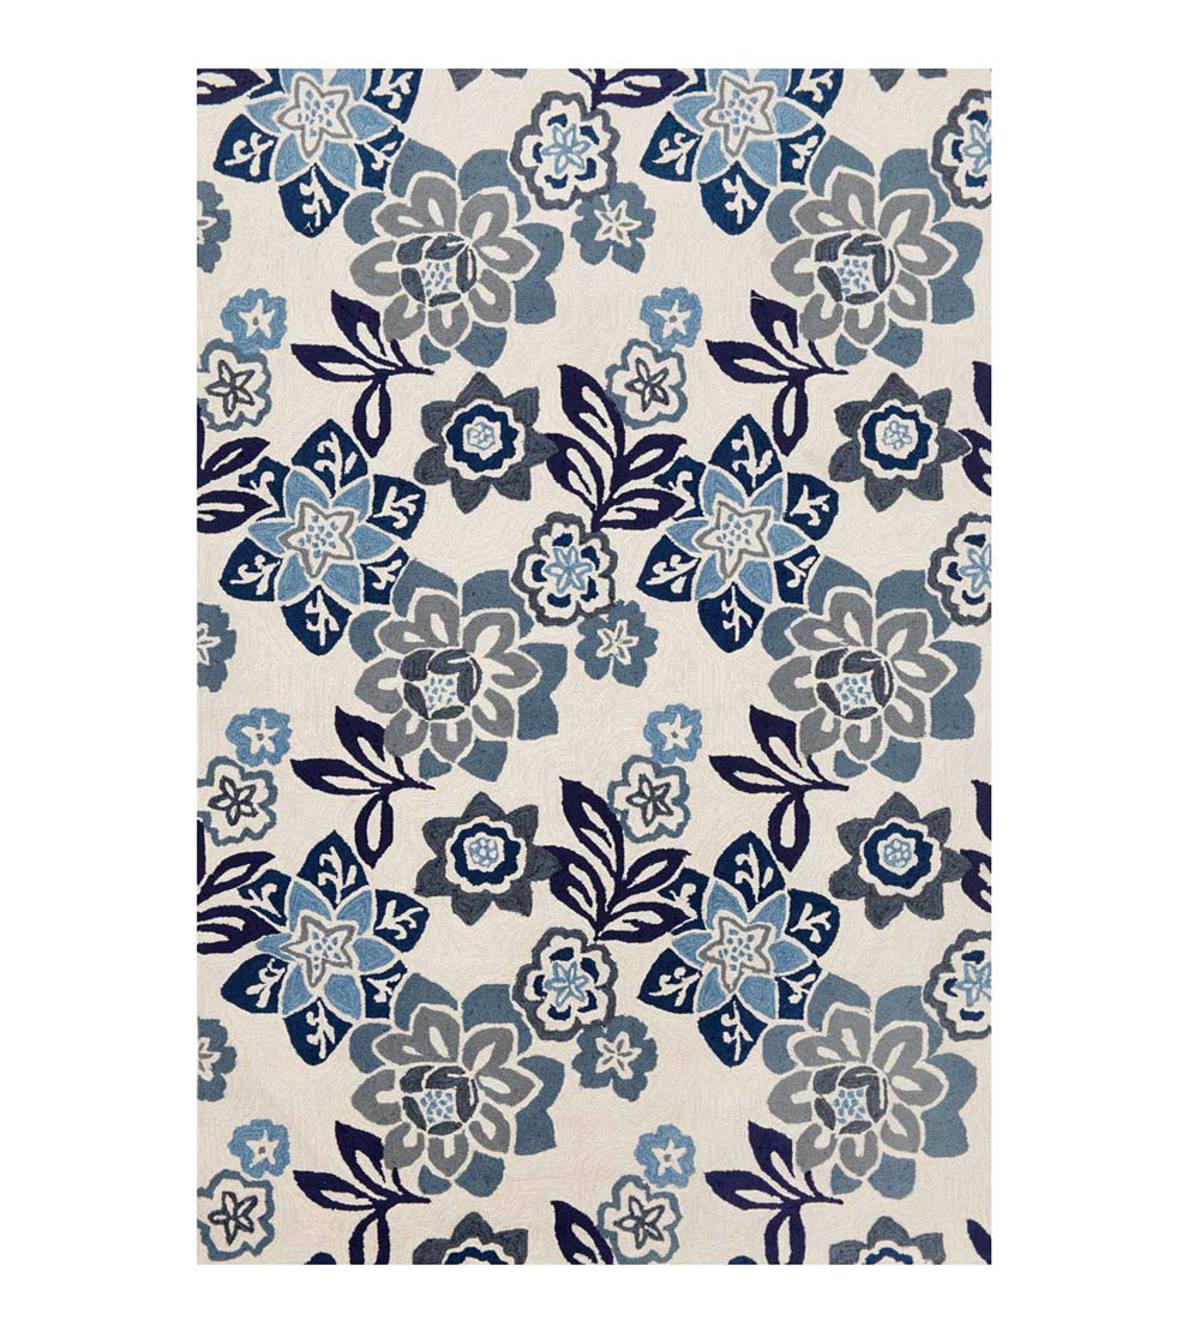 China Blue Floral Accent Rug, 5'W x 7'6"L - China Blue